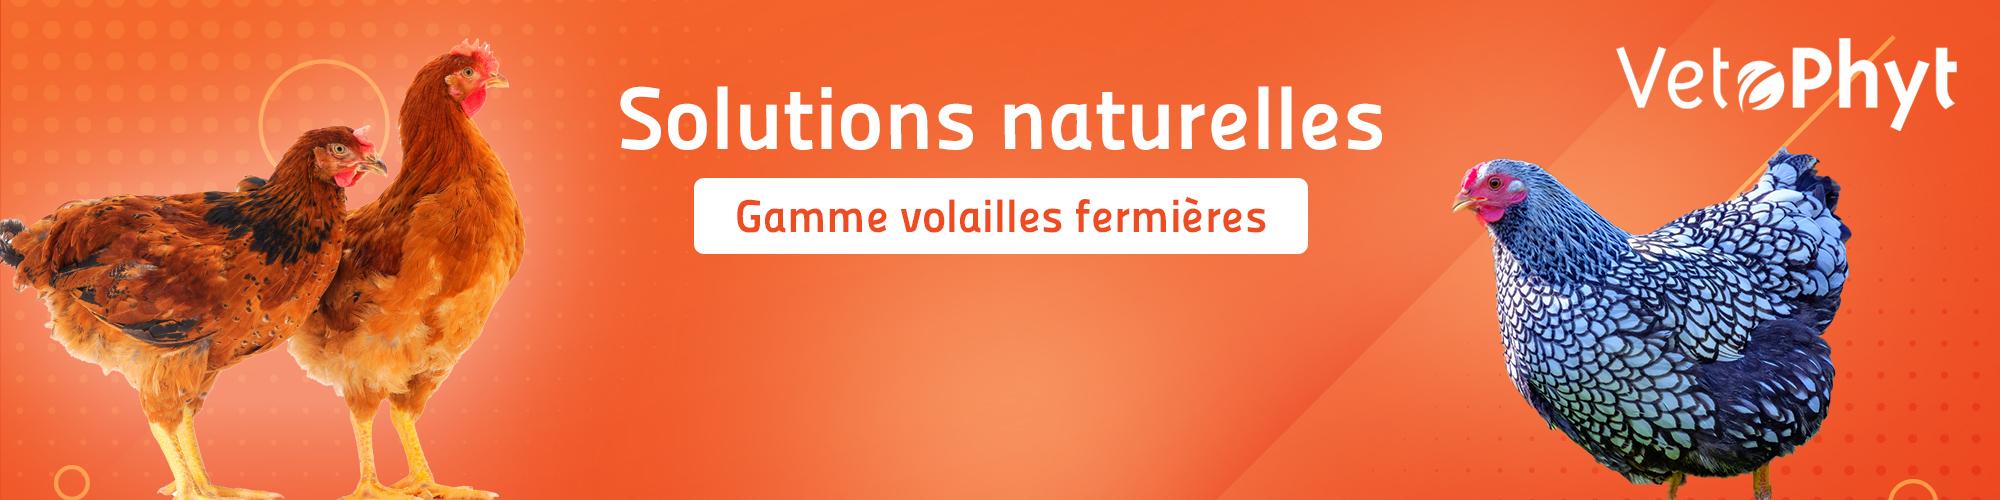 Gamme volailles